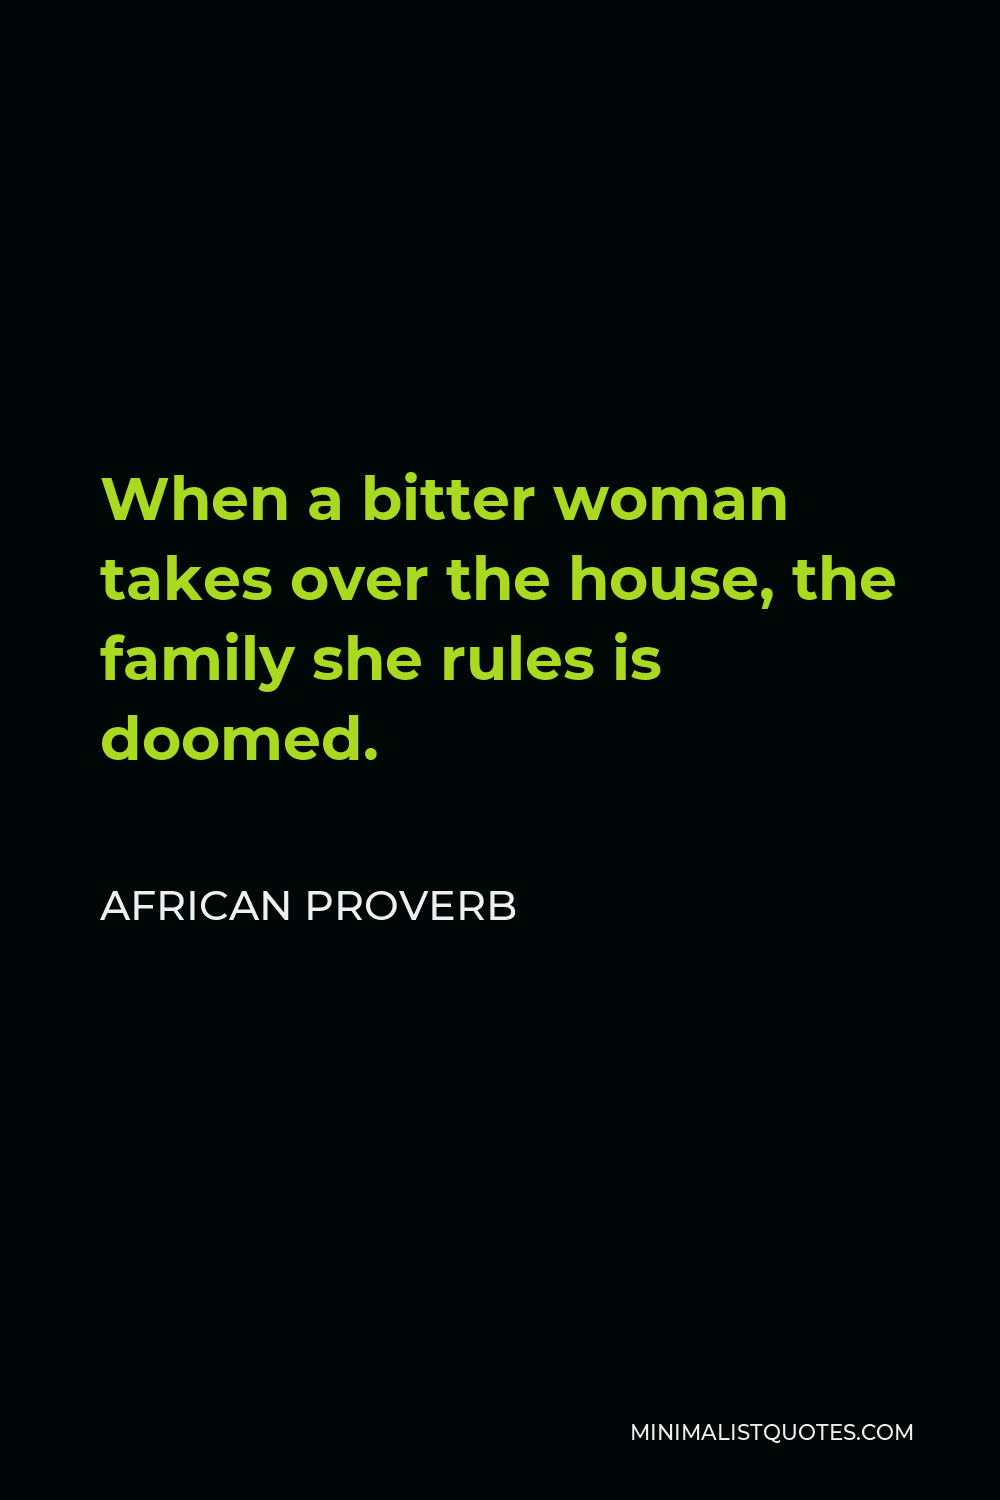 African Proverb Quote - When a bitter woman takes over the house, the family she rules is doomed.